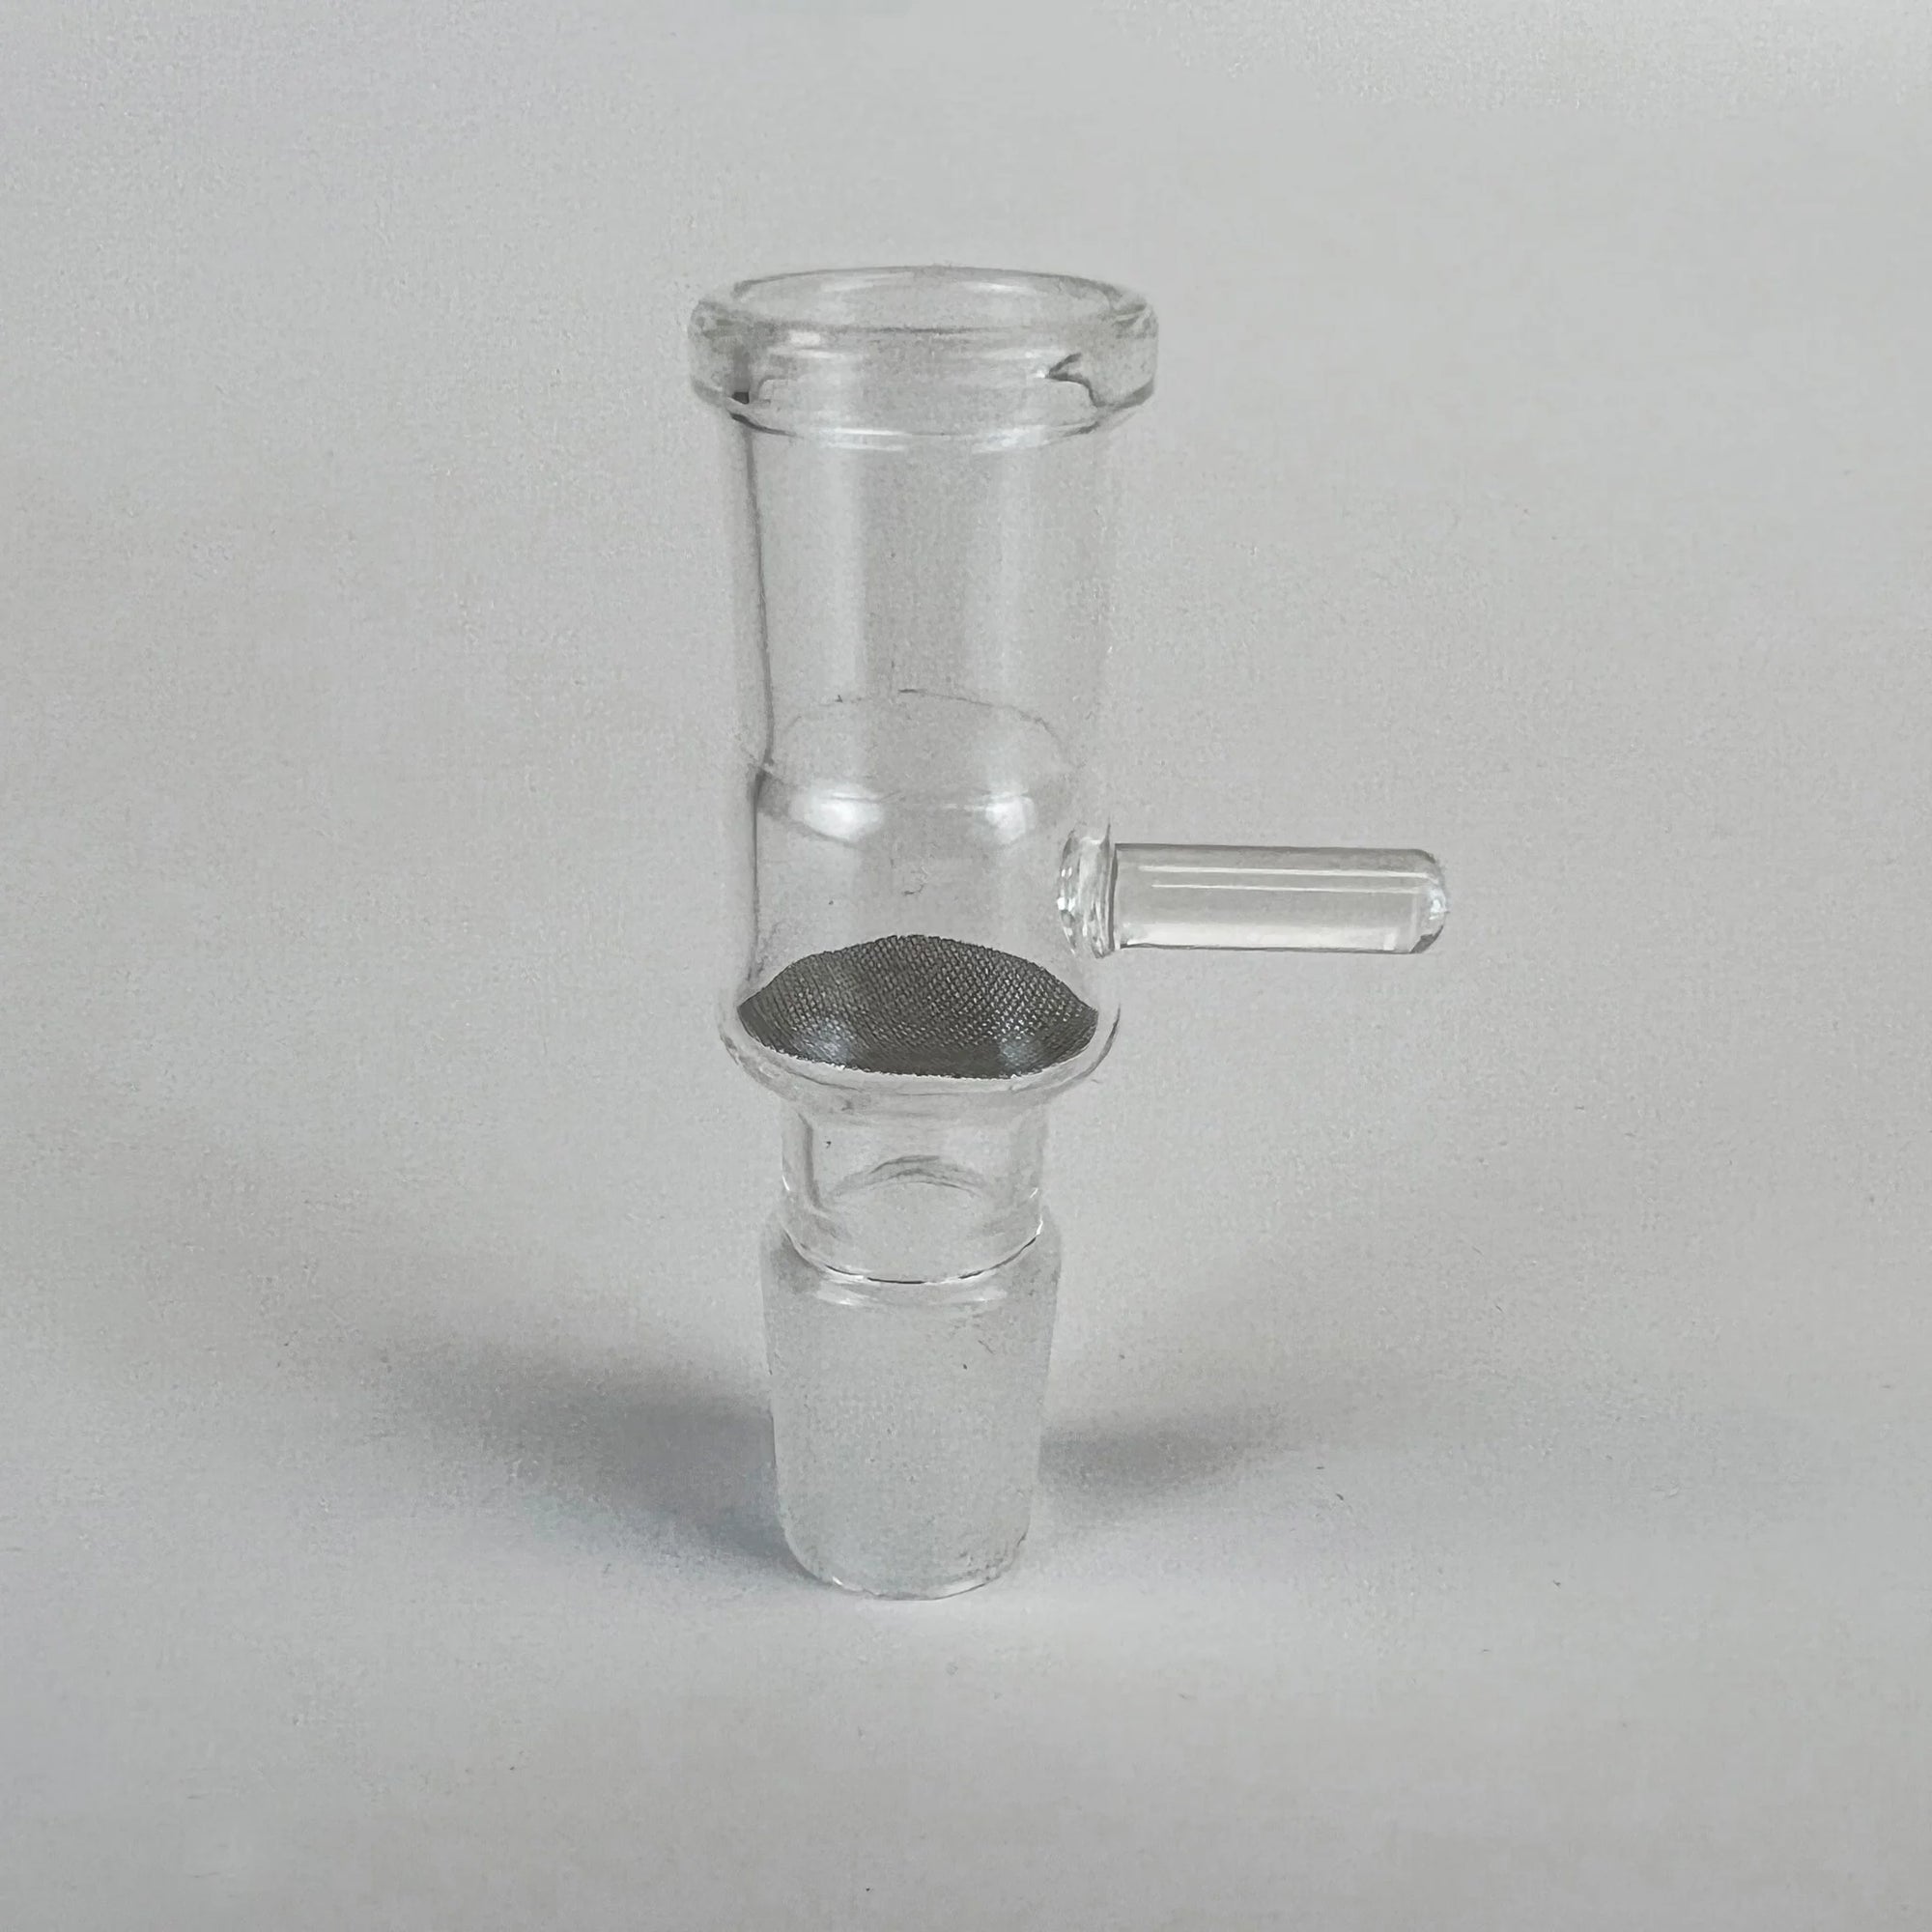 Buy Old Head 18mm Glass Extraction Chamber - Wick and Wire Co Melbourne Vape Shop, Victoria Australia